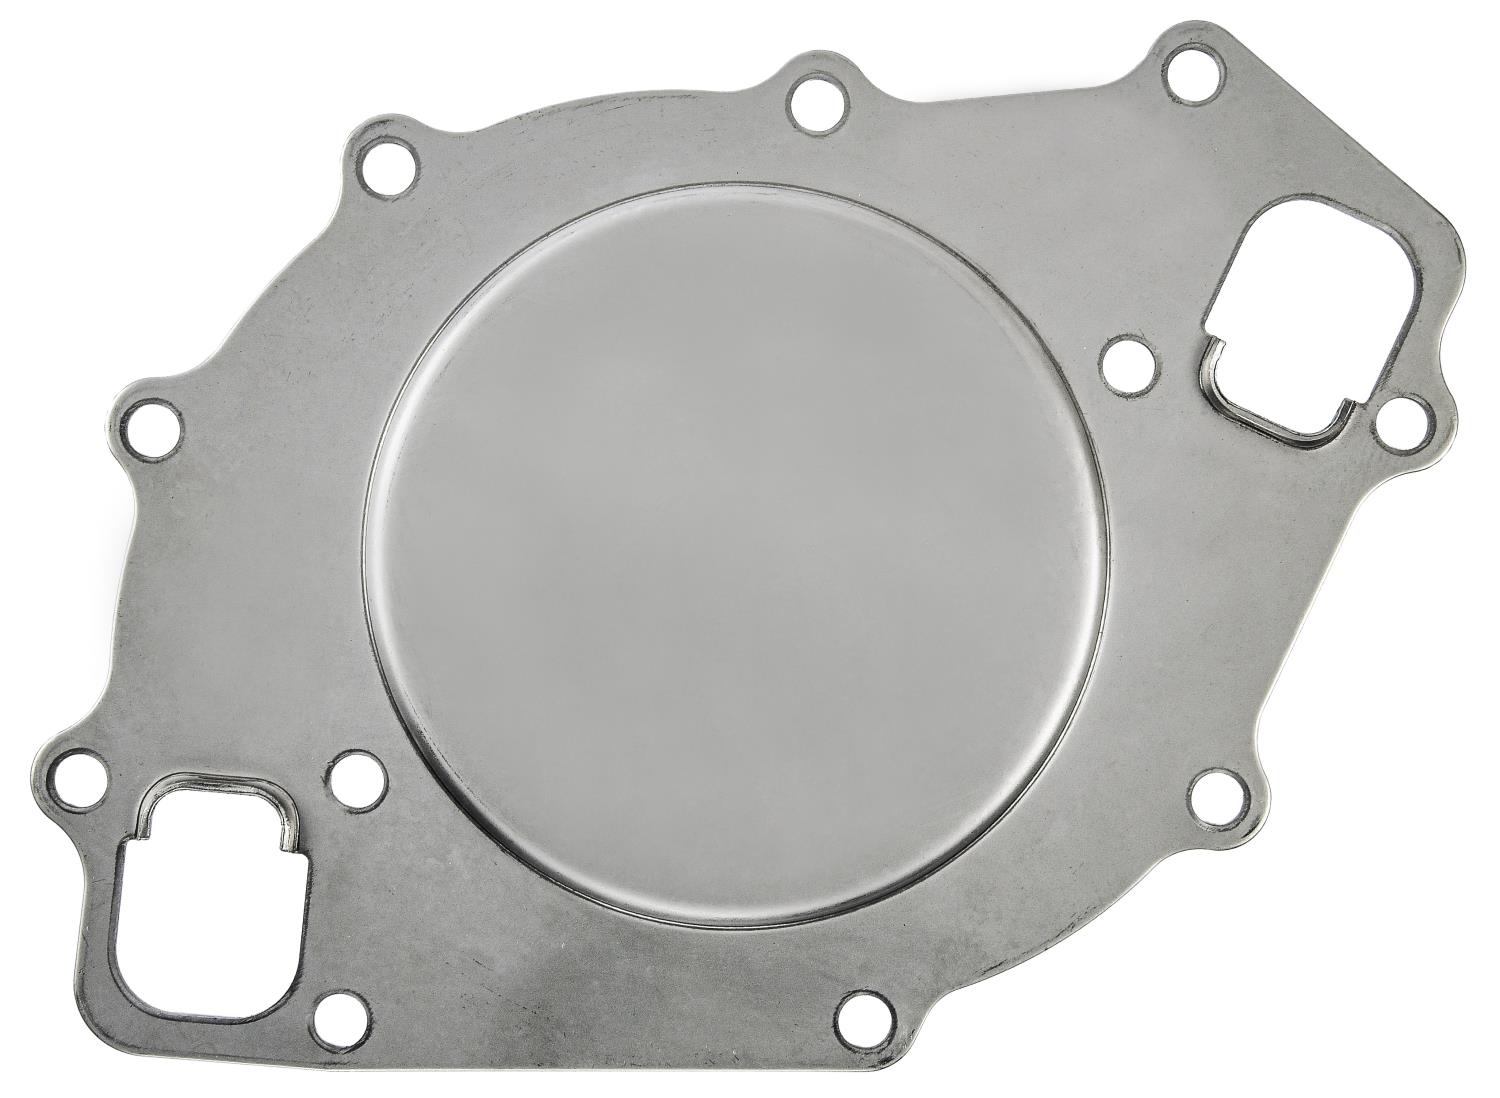 Water Pump Backing Plate for 429, 460 ci Big Block Ford [Stainless Steel]